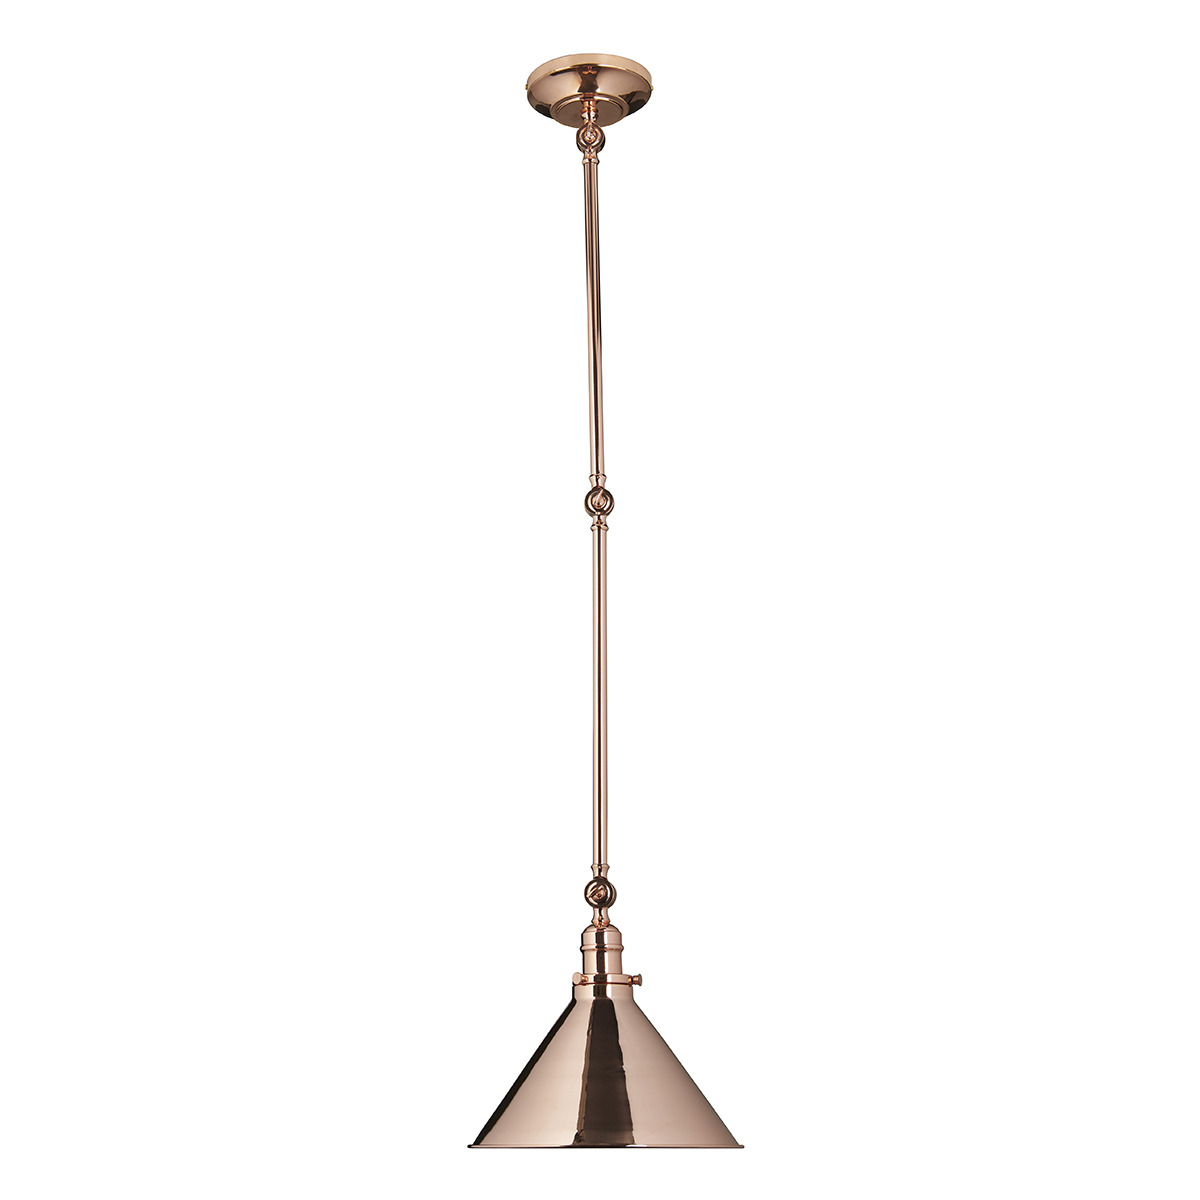 PV/GWP CPR Provence Grande Wall/Pendant Light In Polished Copper